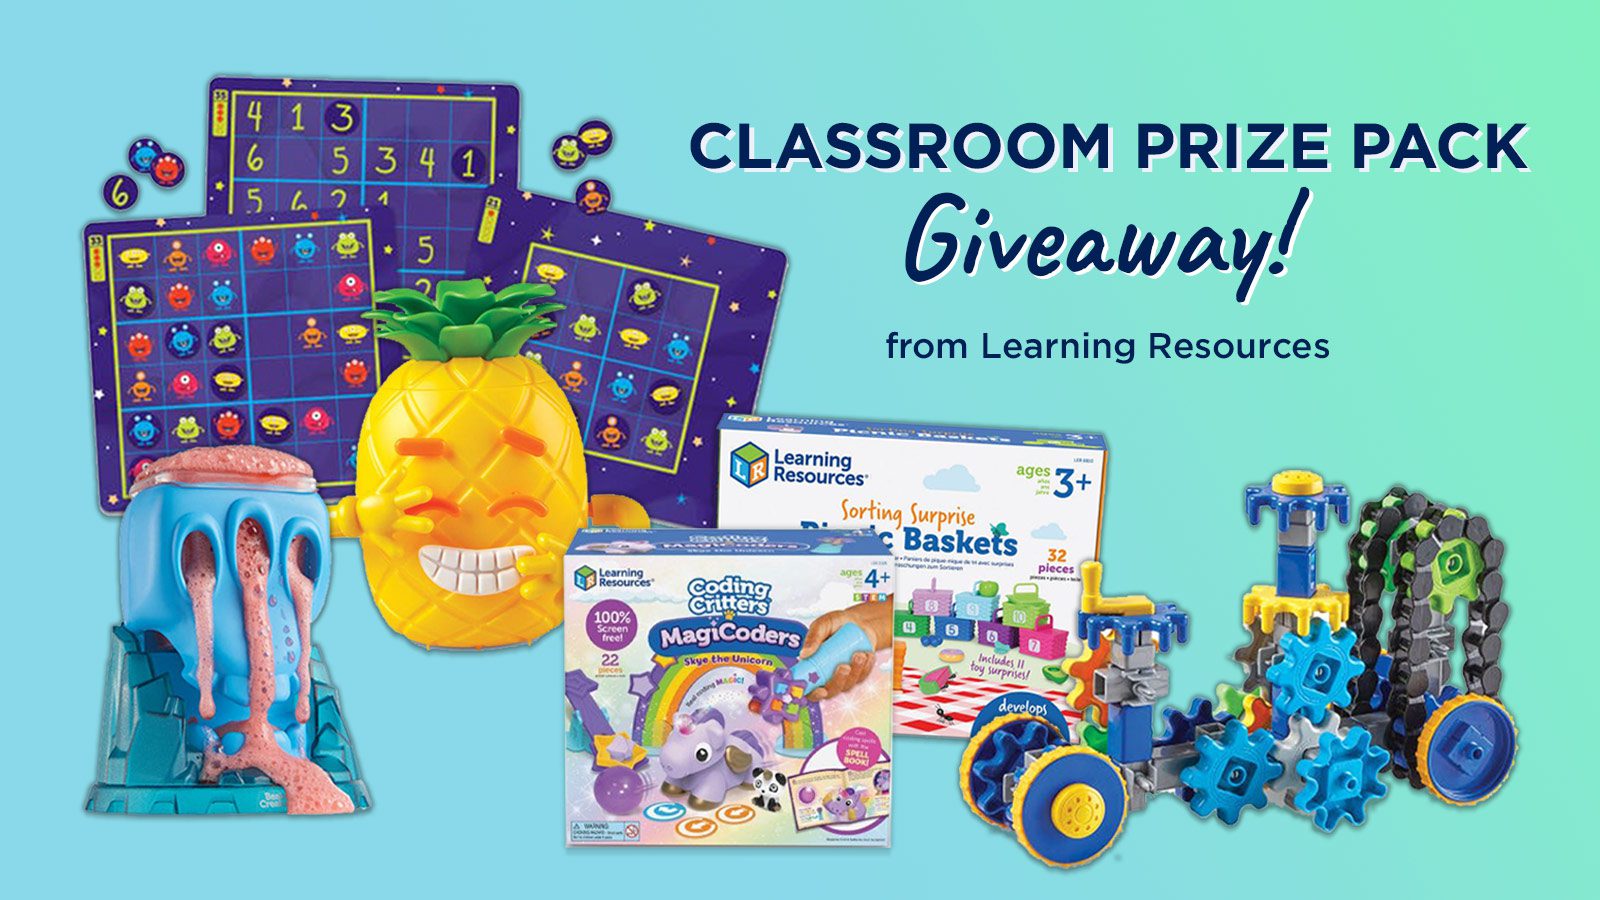 Classroom prize pack giveaway.